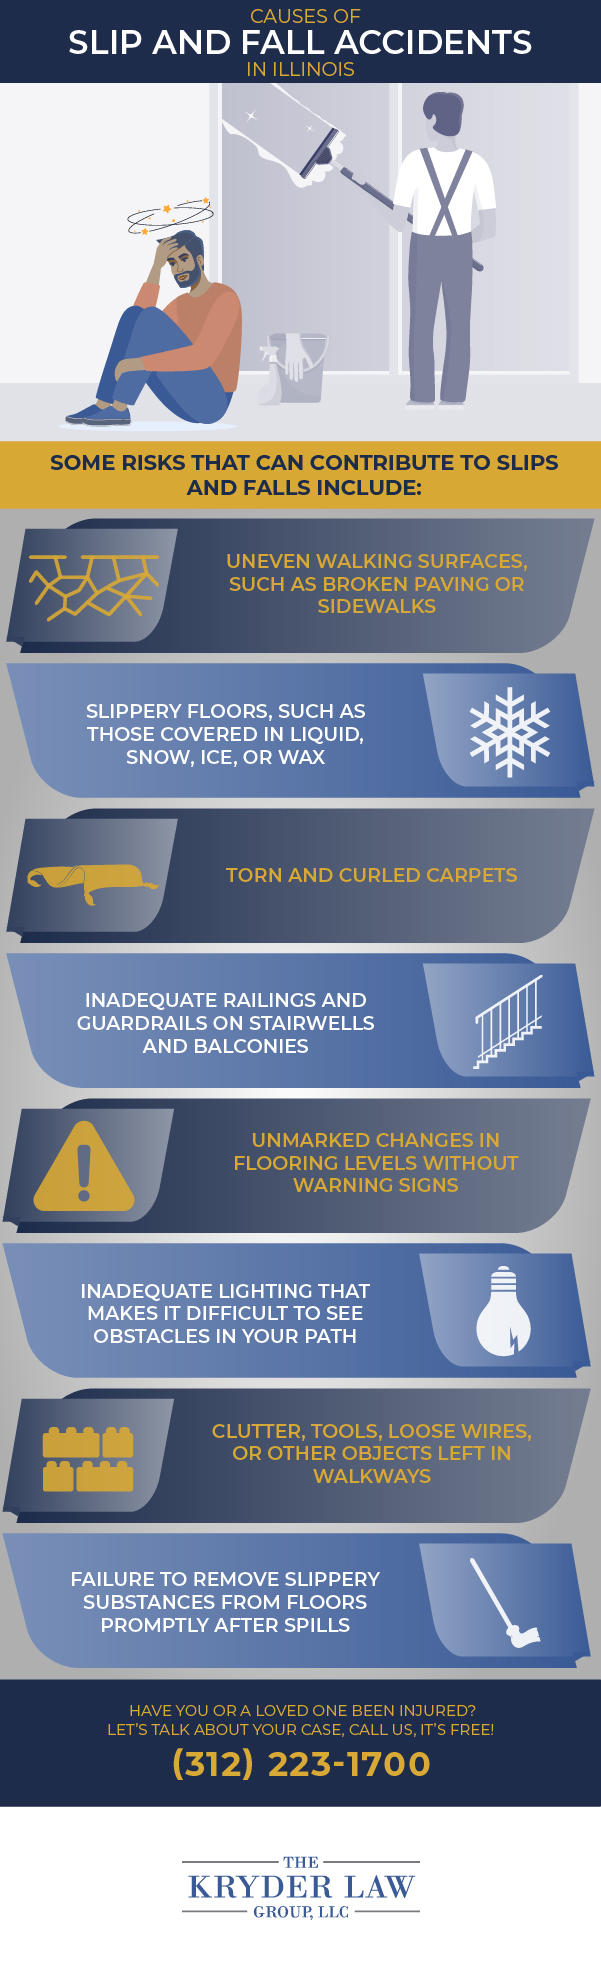 Causes of Slip and Fall Accidents in Illinois